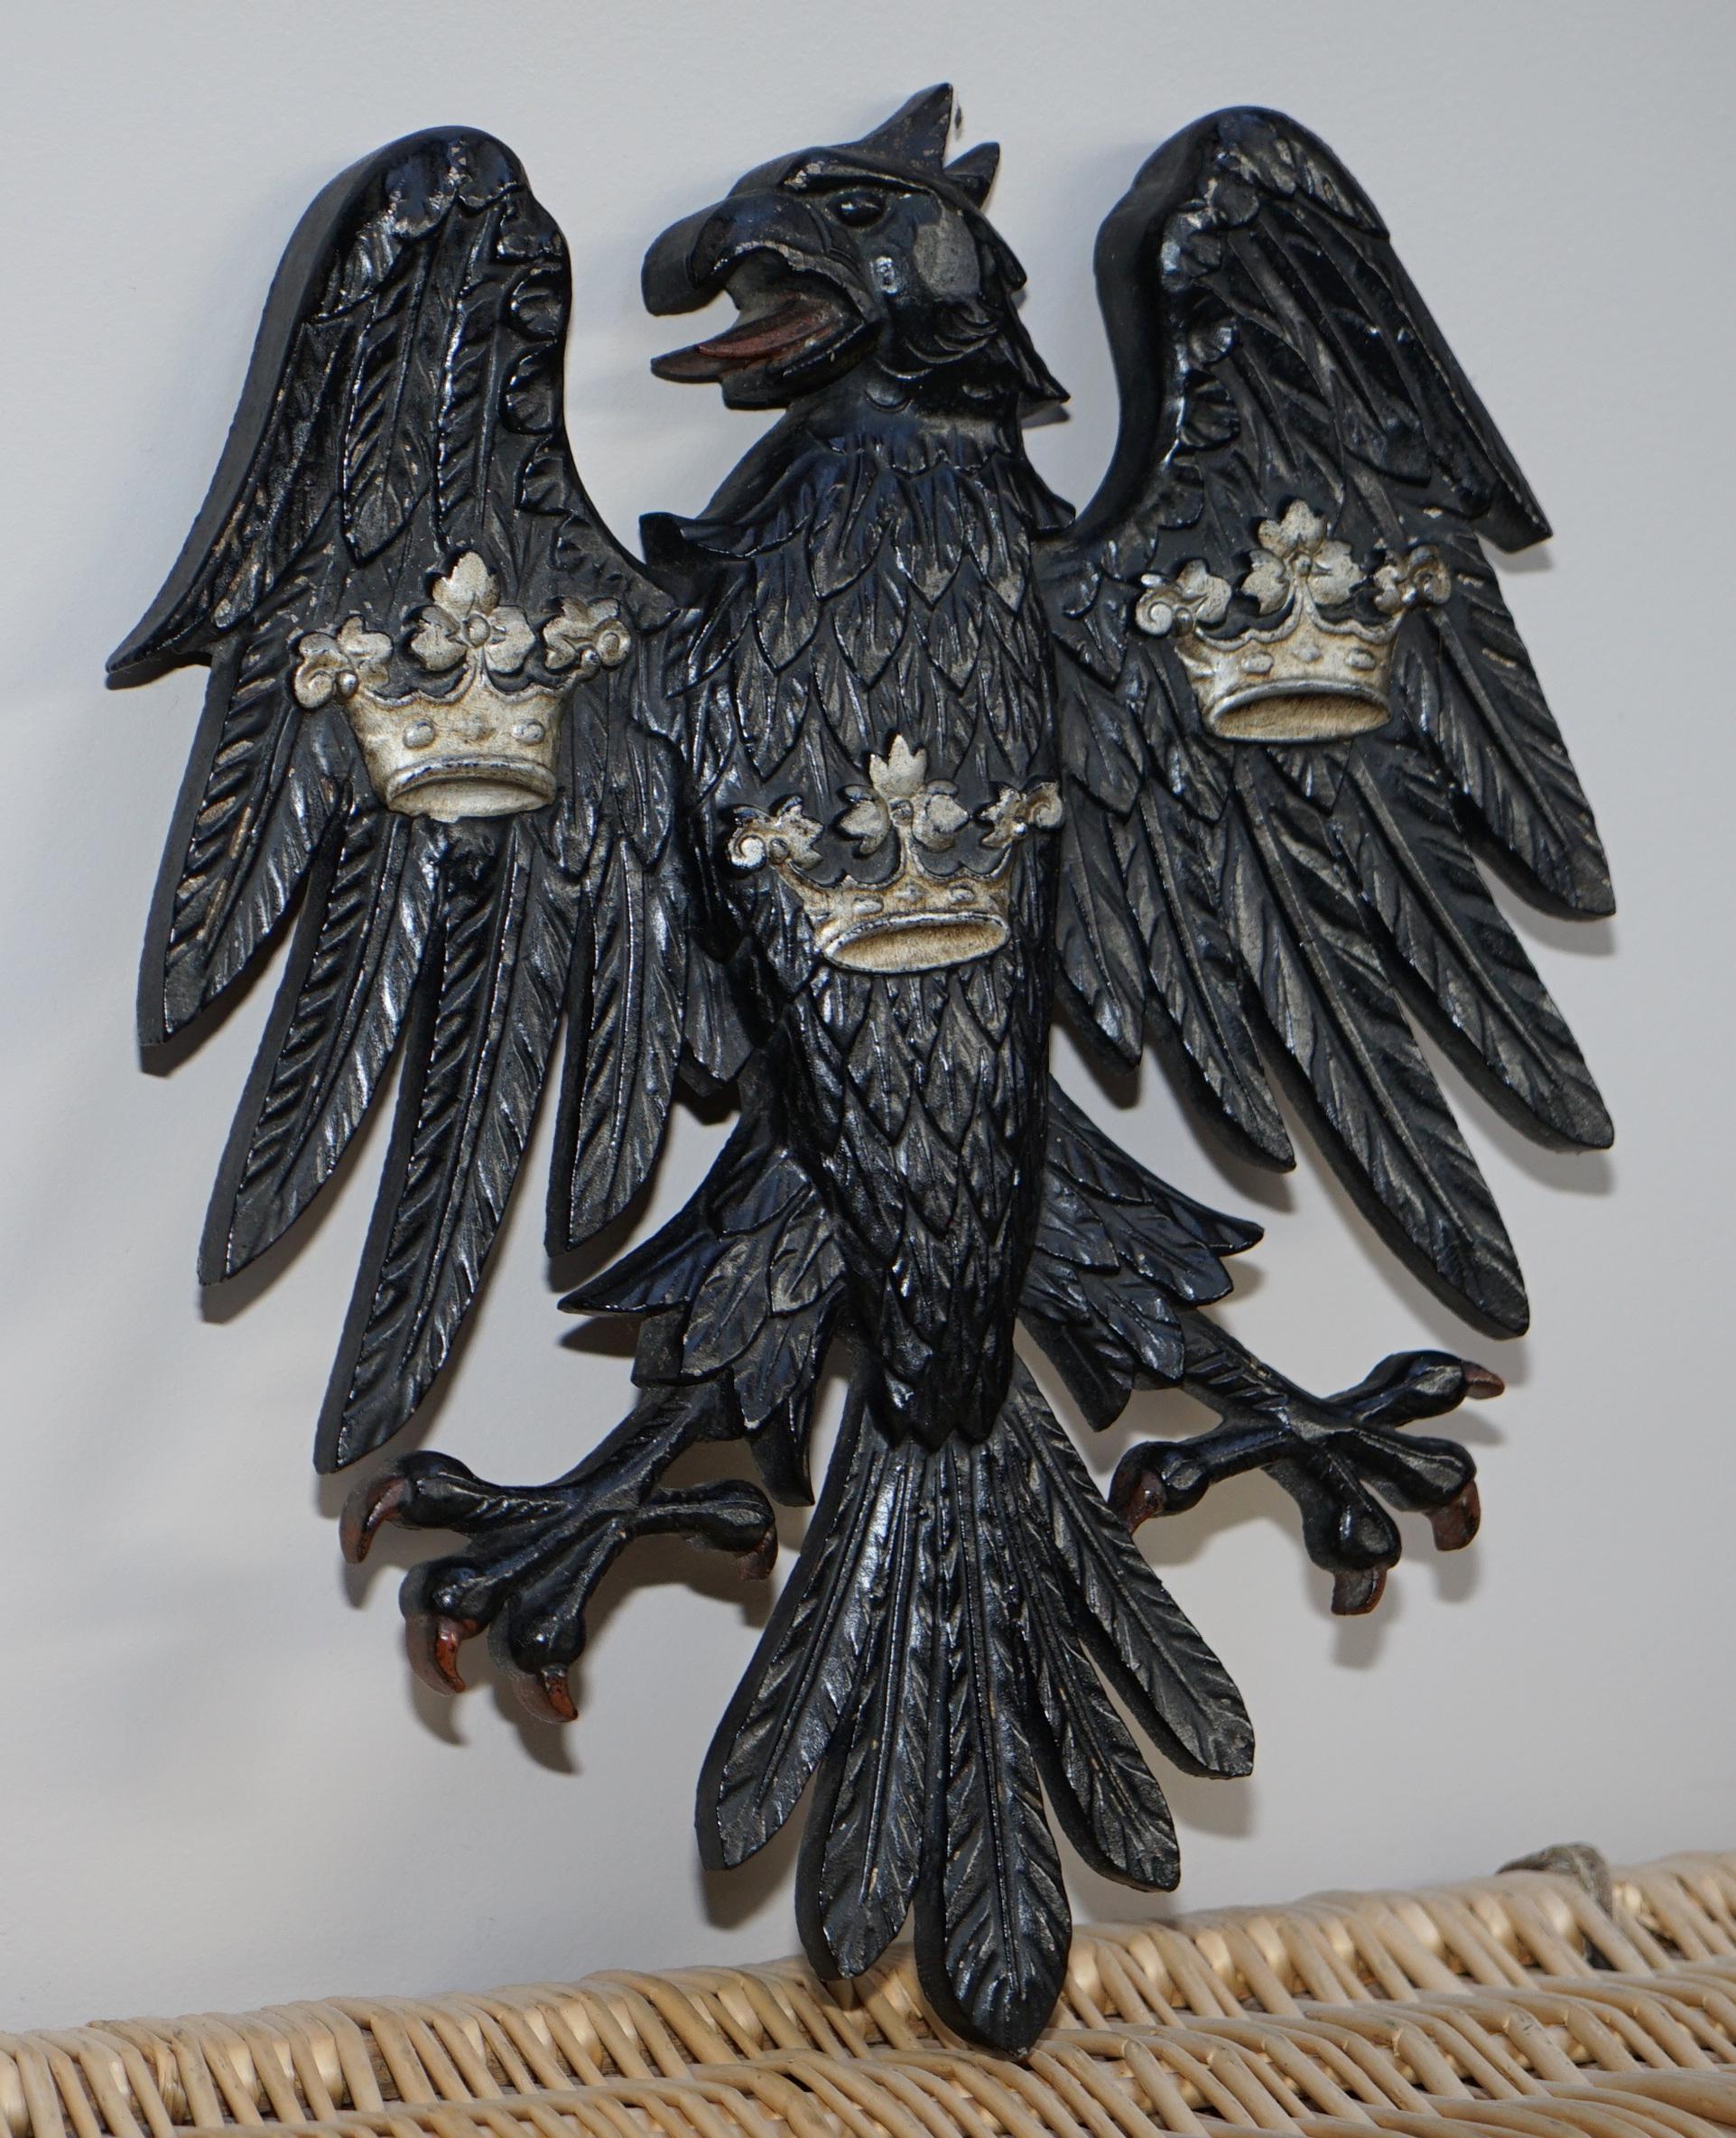 We are delighted to offer for sale this very highly collectible John Barclays bank based on the original from 1736

A very good look and collatable antique John Barclays bank wall mounted spread eagle with three crowns

This is reclaimed from